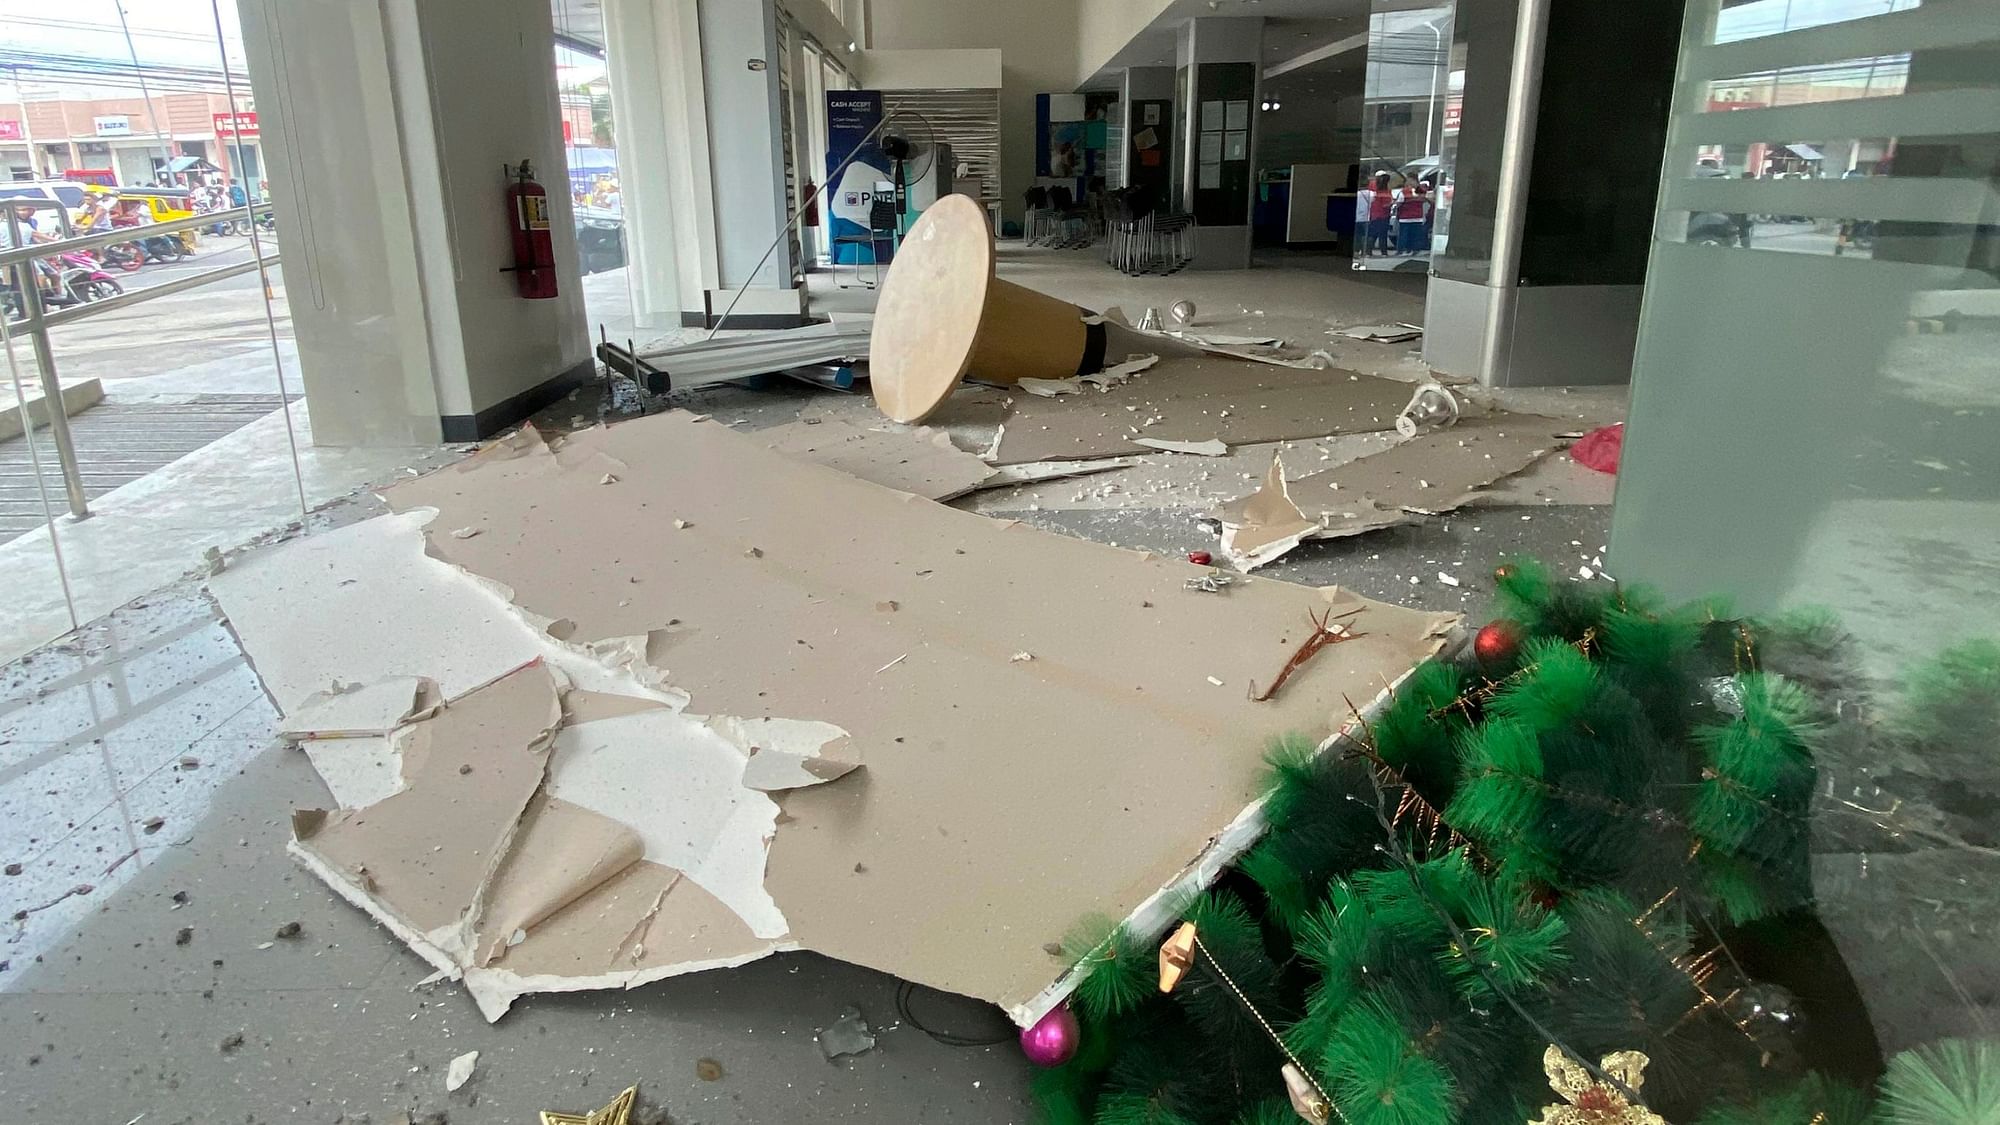 In this photo provided by the Philippine Red Cross, a Christmas tree and other debris lie on the ground inside a building after a strong earthquake shook Digos, Davao del Sur province, southern Philippines on Sunday.